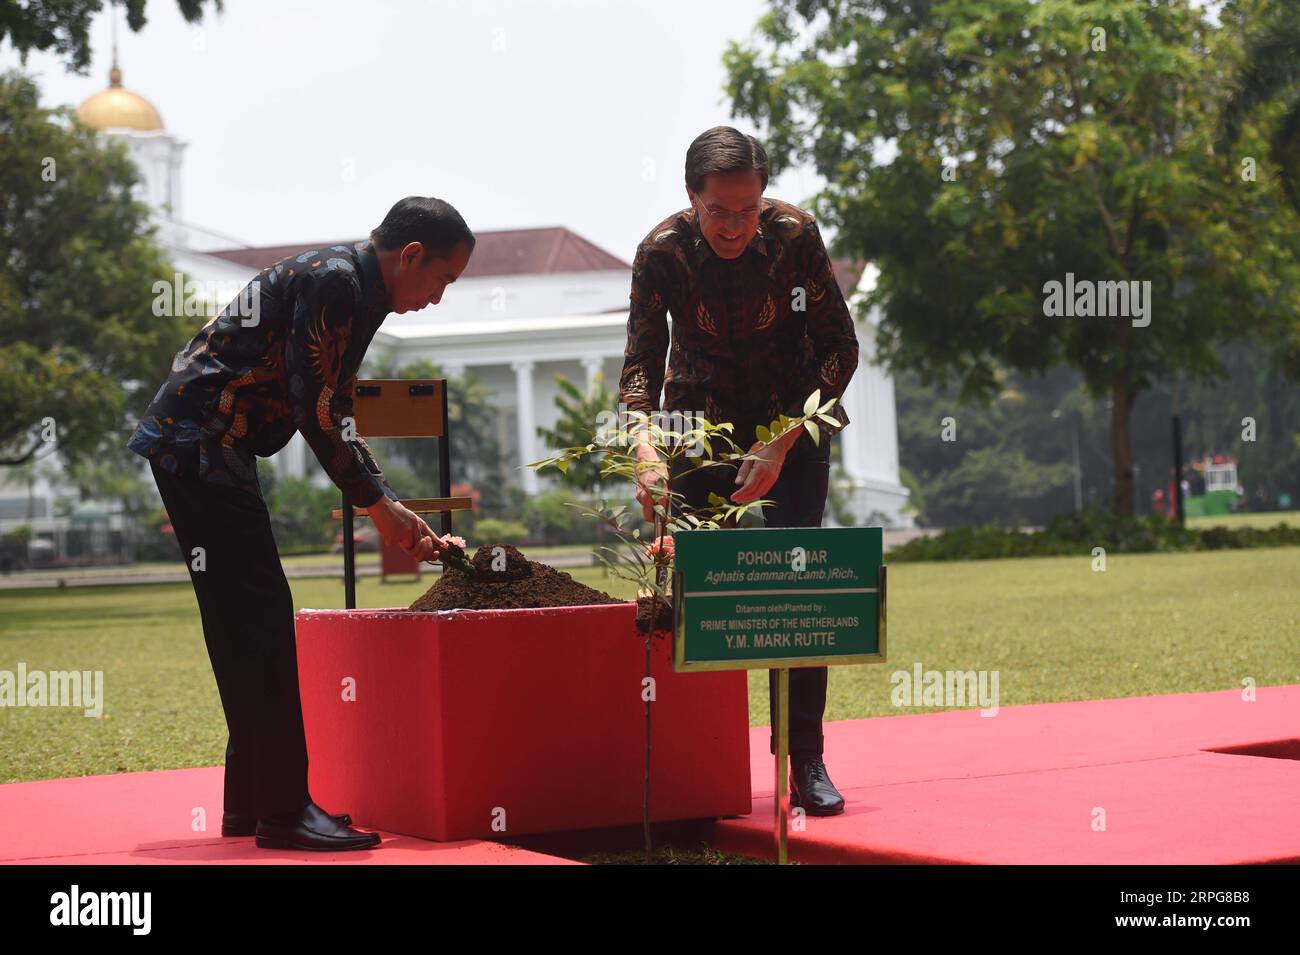 191007 -- BOGOR, Oct. 7, 2019 -- Visiting Dutch Prime Minister Mark Rutte R and Indonesian President Joko Widodo plant a tree at the presidential palace in Bogor, West Java Province, Indonesia, Oct. 7, 2019.  INDONESIA-BOGOR-DUTCH PM-VISIT Zulkarnain PUBLICATIONxNOTxINxCHN Stock Photo